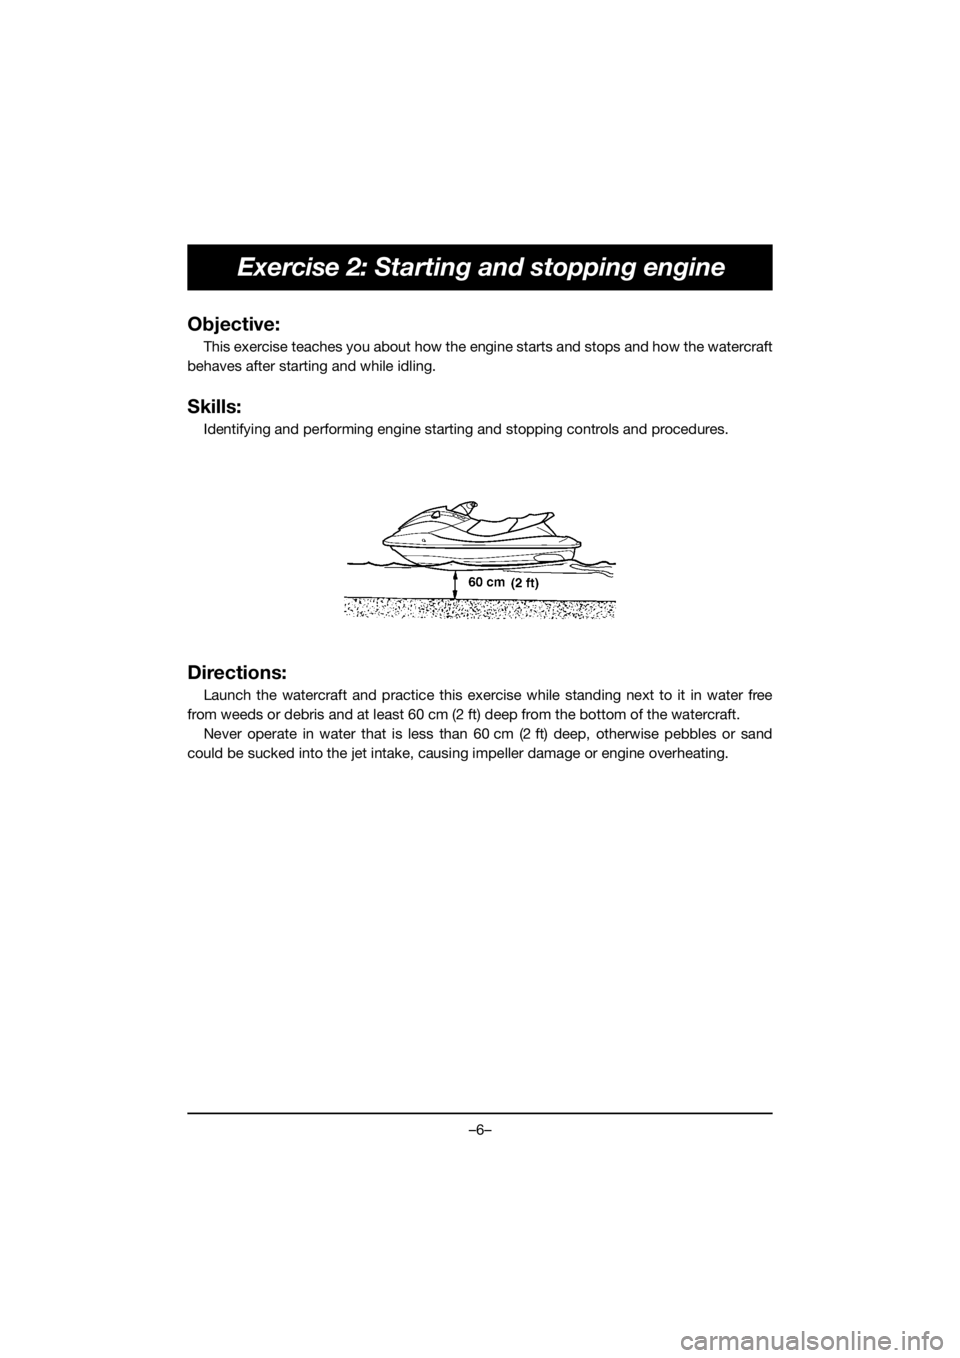 YAMAHA FX HO 2019  Manuale duso (in Italian) –6–
Exercise 2: Starting and stopping engine
Objective:
This exercise teaches you about how the engine starts and stops and how the watercraft
behaves after starting and while idling.
Skills:
Iden